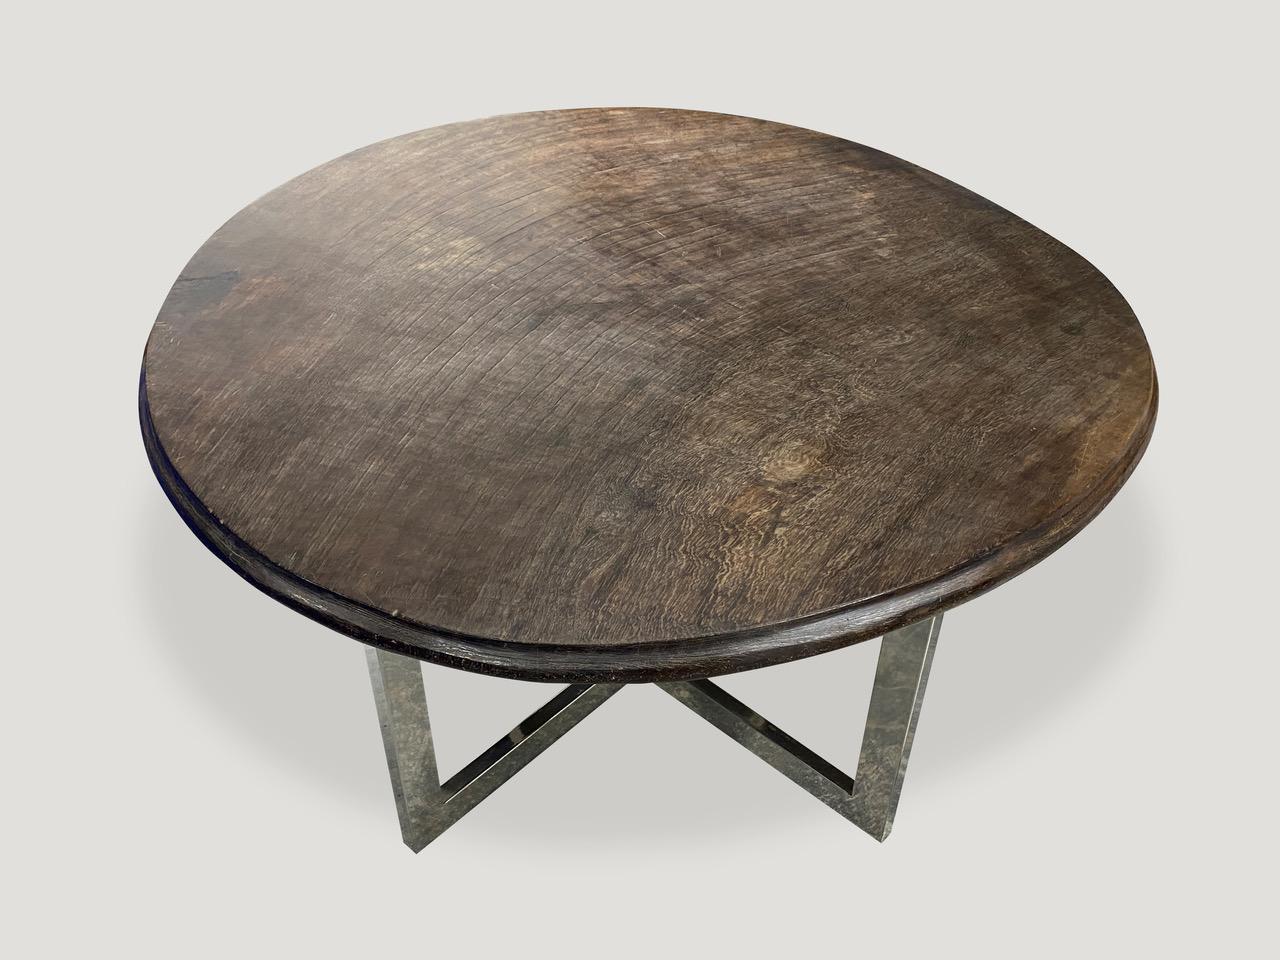 Impressive single slab top ulin wood coffee table from Kalimantan. Stunning patina and hand carved beveled edge on this antique top. We added a contrasting modern steel base. 1